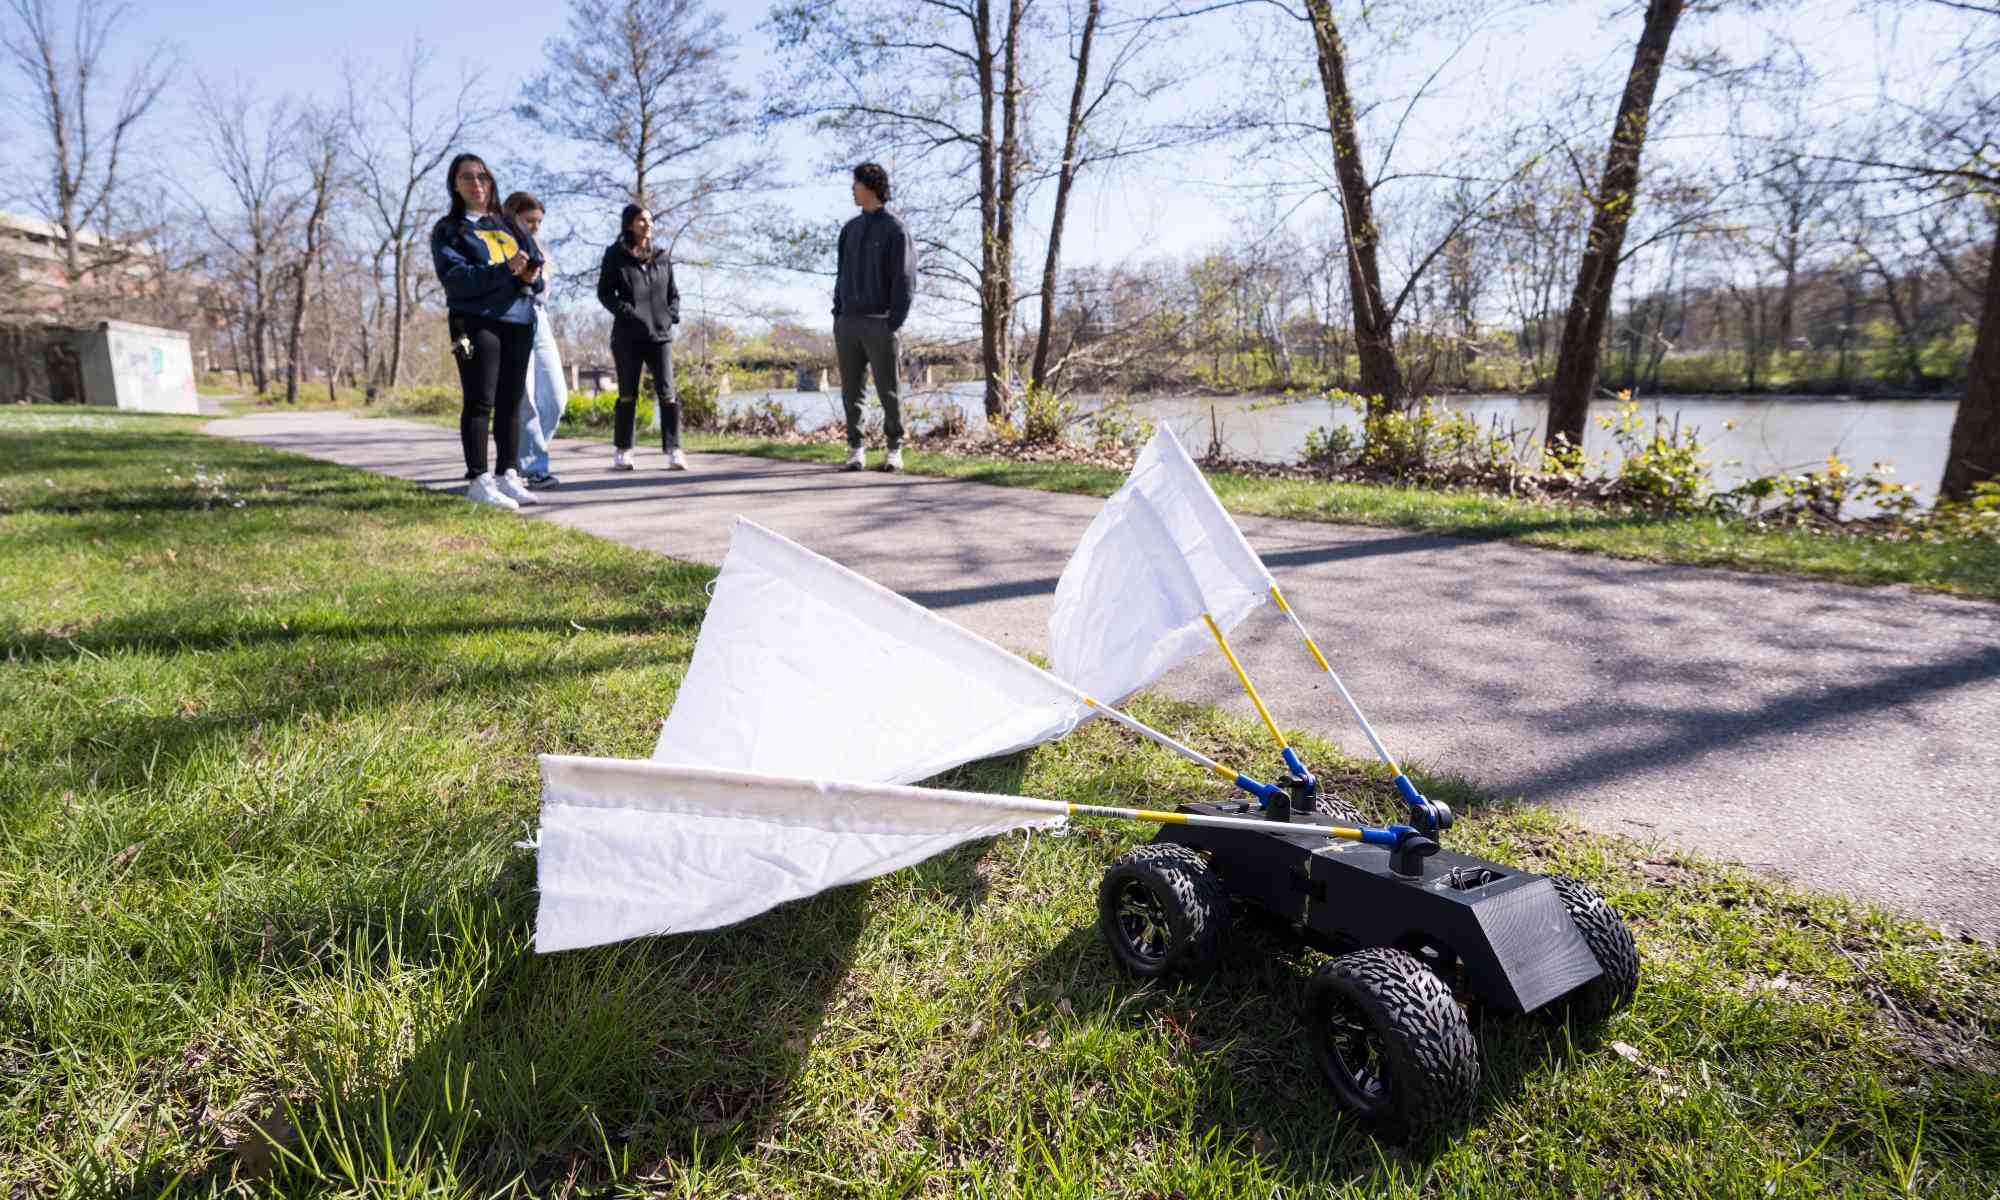 A radio controlled car with white flannel flags attached and four students in the background controlling it on a bike path.